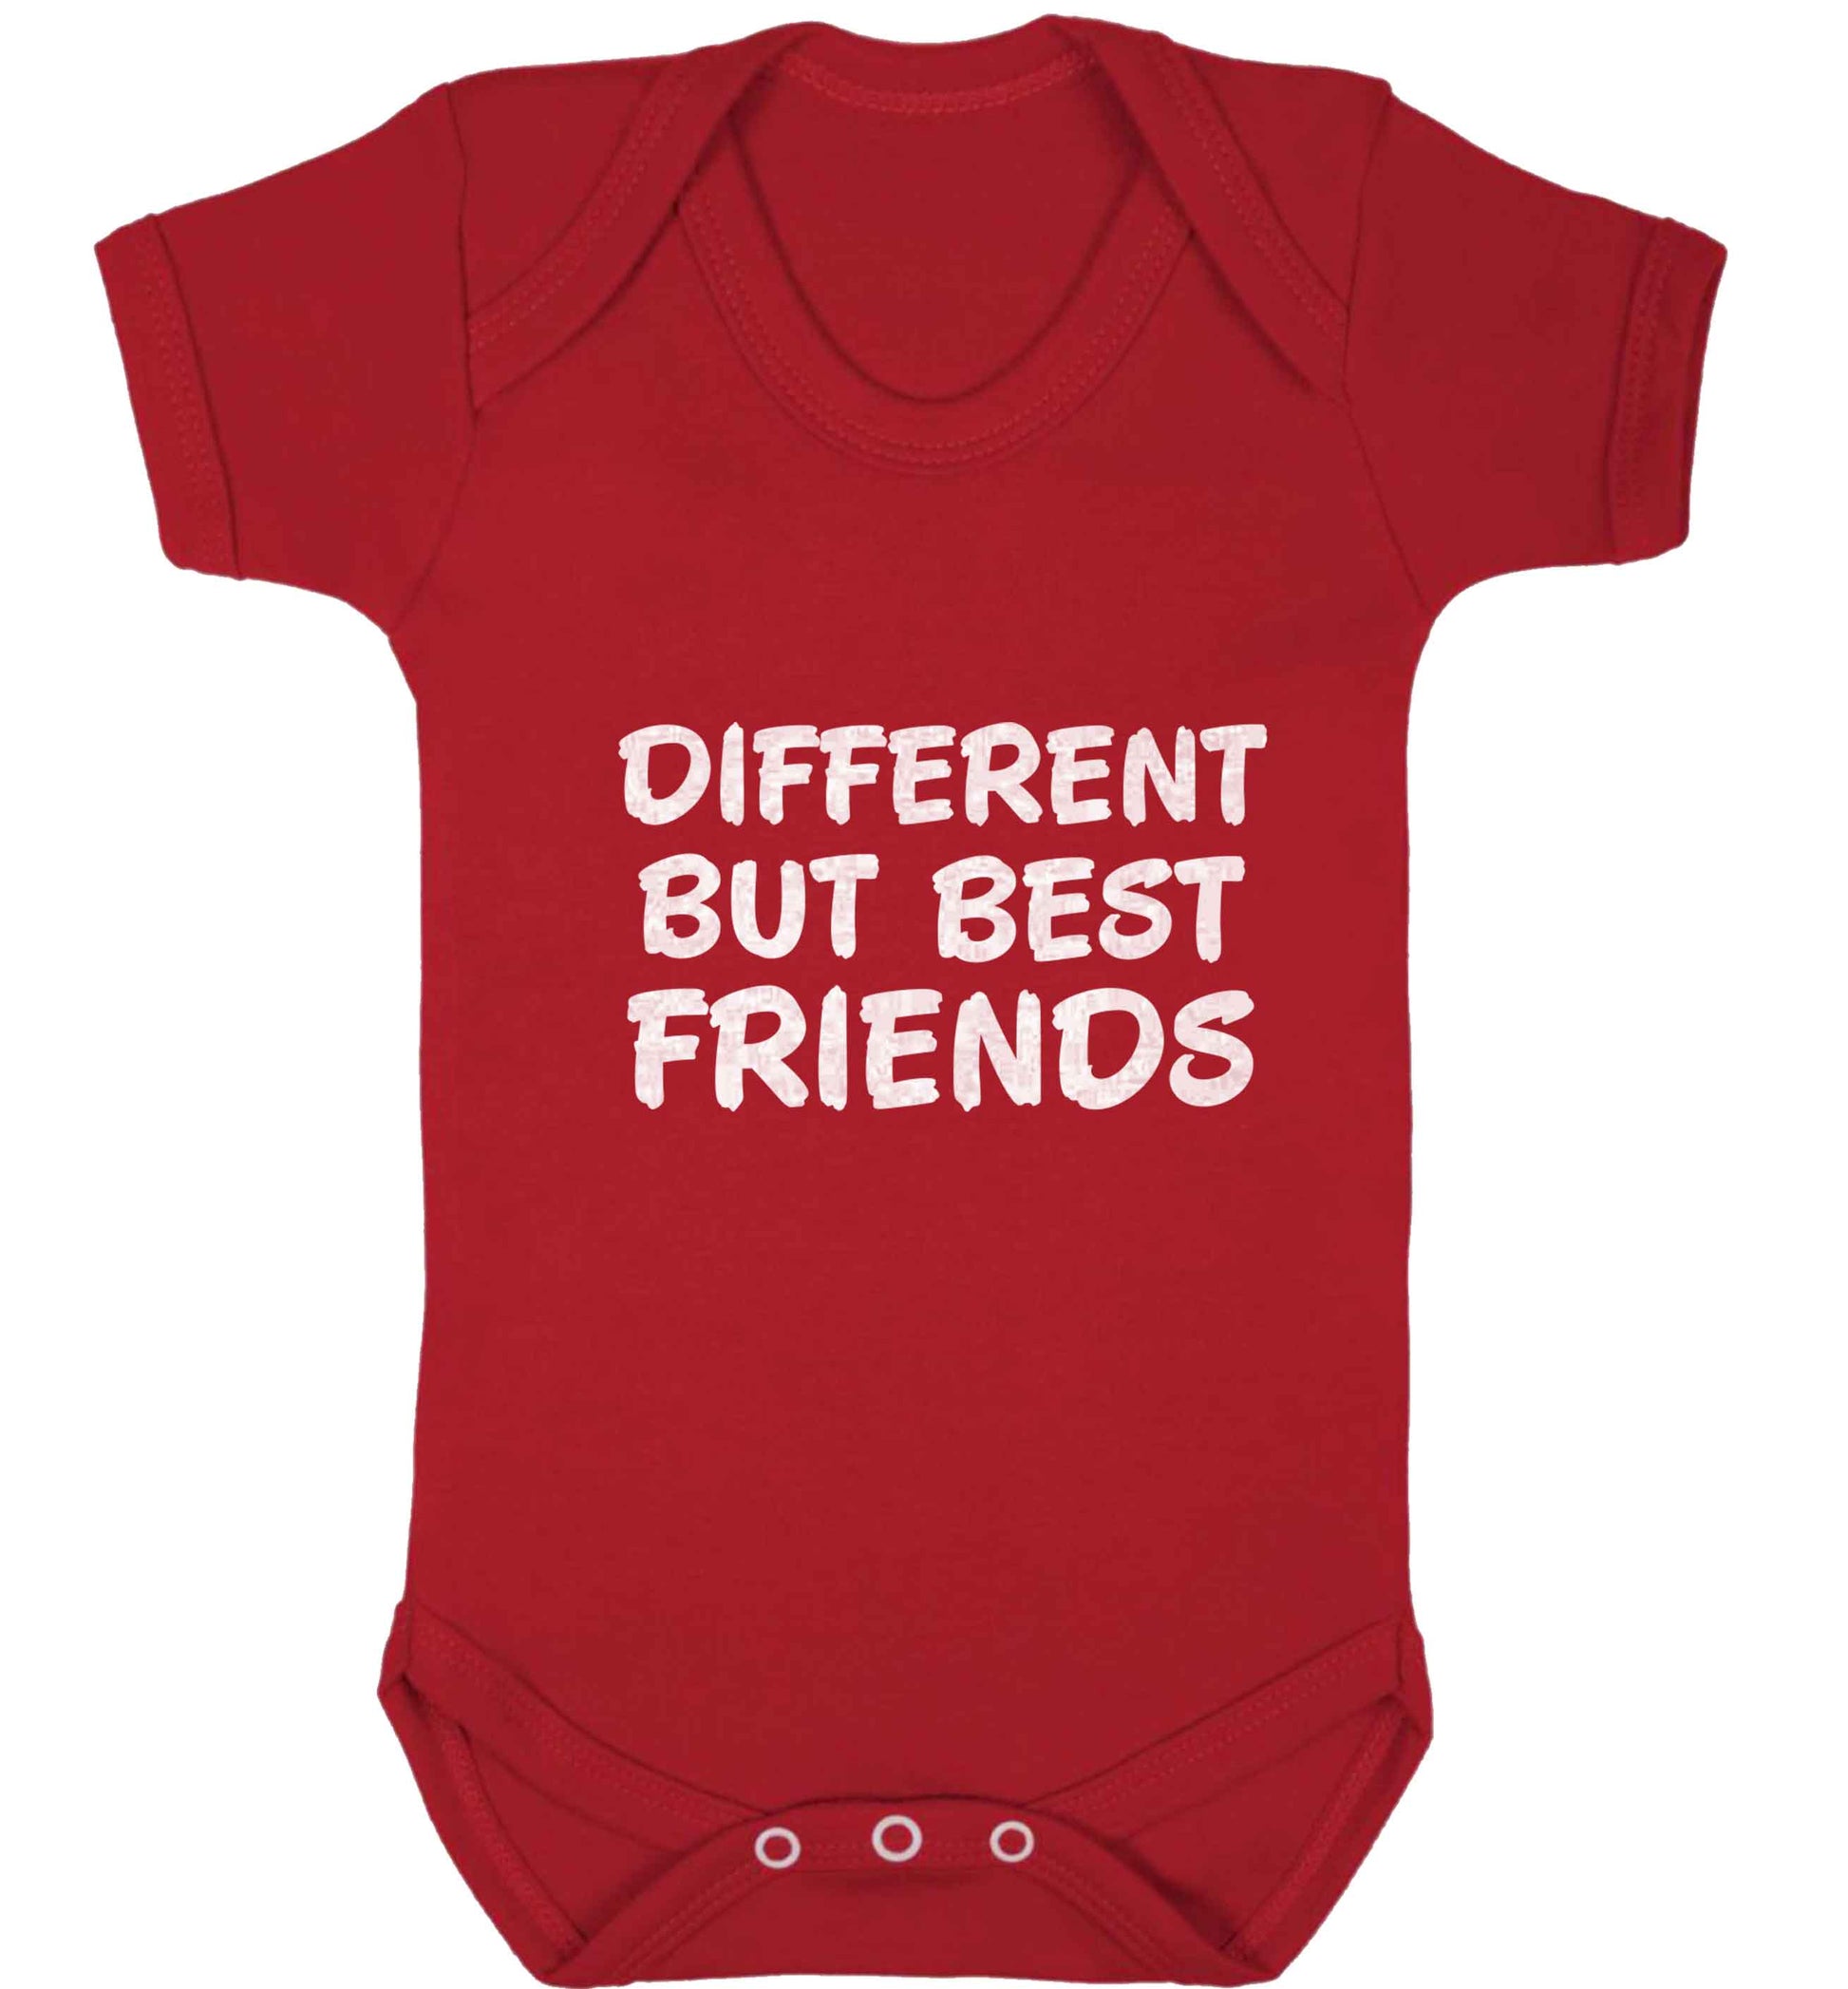 Different but best friends baby vest red 18-24 months